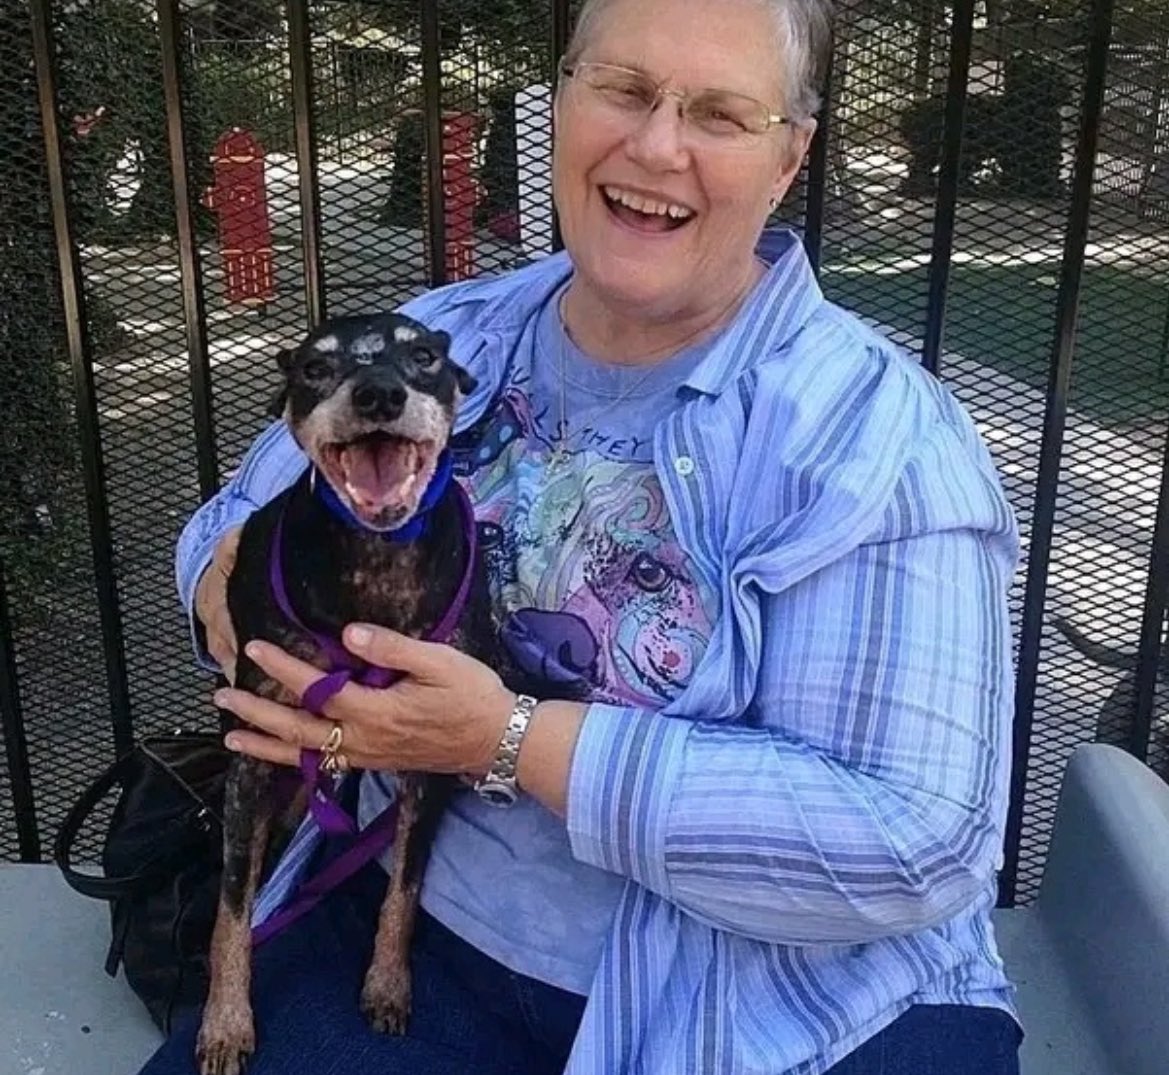 @AMAZlNGNATURE KINDNESS story that touched my heart This kind woman walked into our shelter and asked who the oldest, hardest to adopt dog was. So we introduced her to Jake. All I can say is God Bless this woman. Jake has been with us for a long time, is a senior, and has cancer in addition